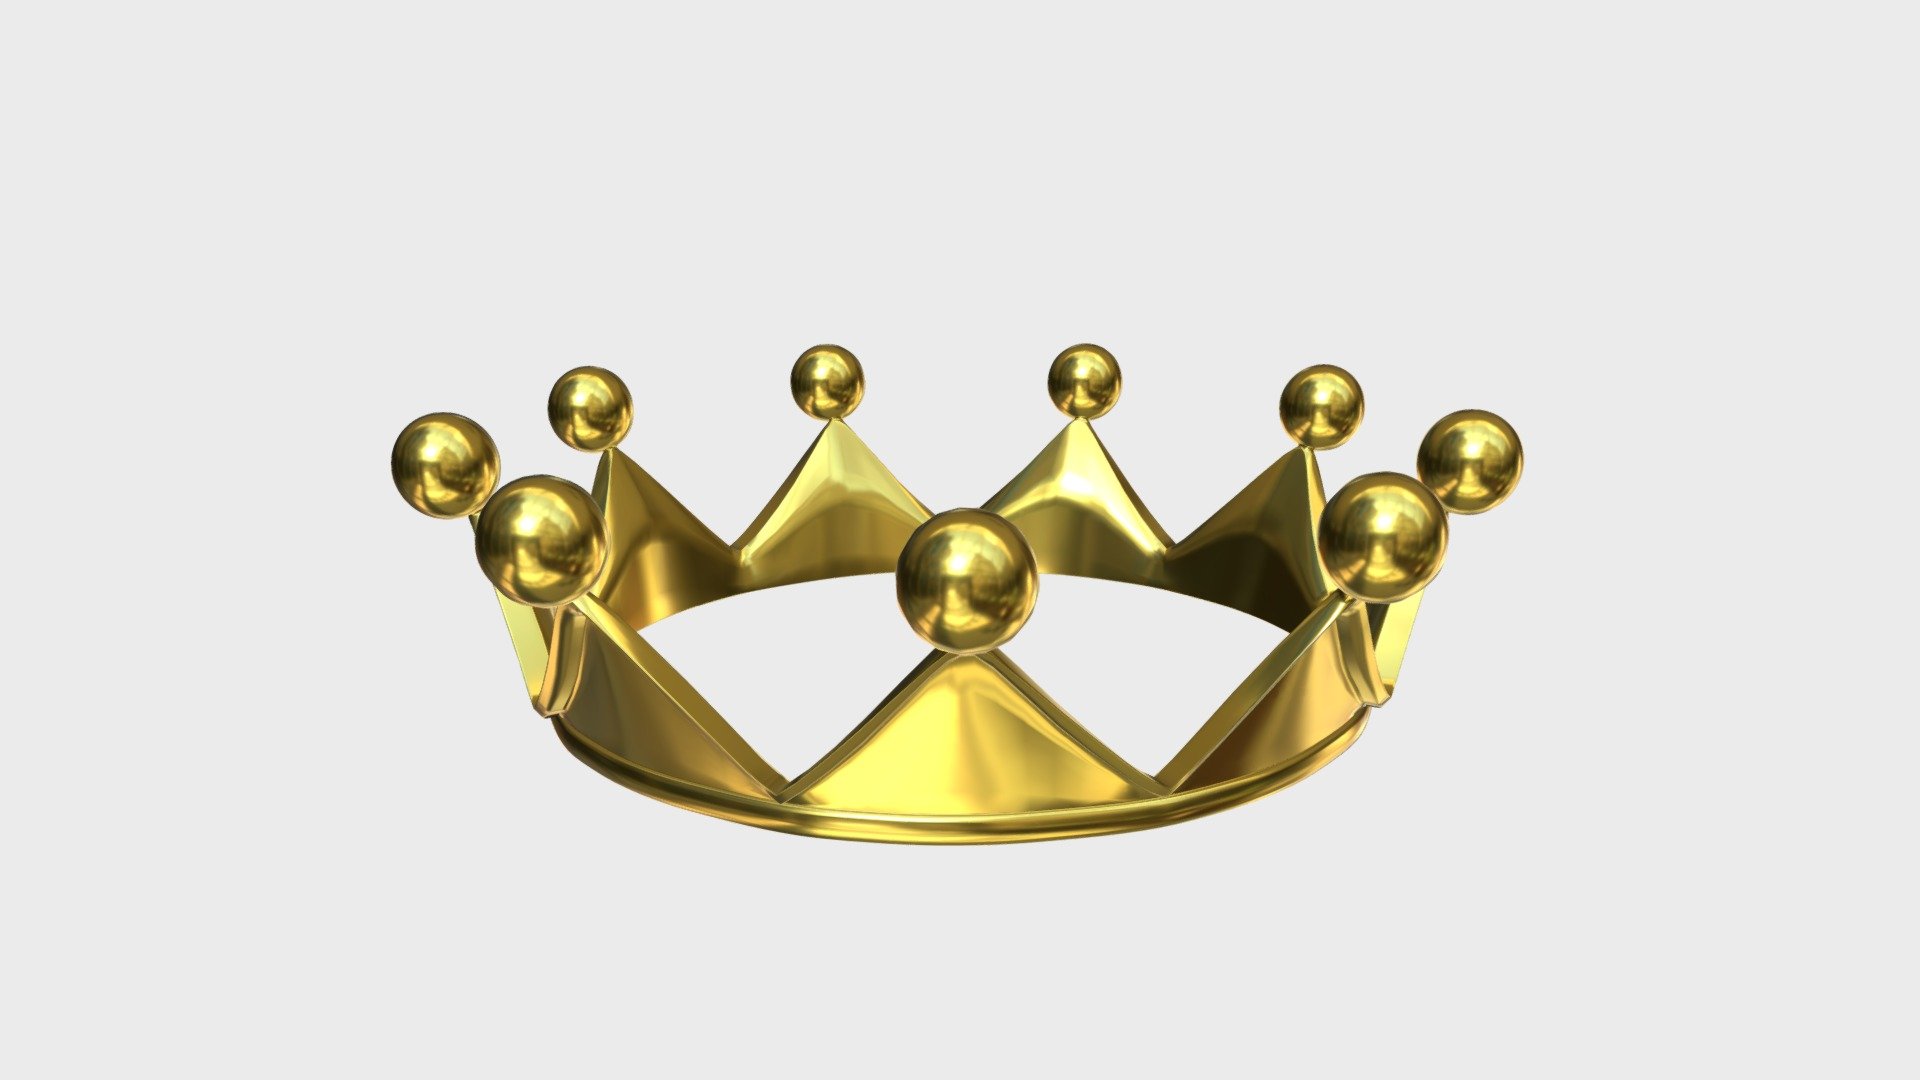 === The following description refers to the additional ZIP package provided with this model ===

Gold crown 3D Model, nr. 8 in my collection. Production-ready 3D Model, with PBR materials, textures, non overlapping UV Layout map provided in the package.

Quads only geometries (no tris/ngons).

Formats included: FBX, OBJ; scenes: BLEND (with Cycles / Eevee PBR Materials and Textures); other: png with Alpha.

1 Object (mesh), 1 PBR Material, UV unwrapped (non overlapping UV Layout map provided in the package); UV-mapped Textures.

UV Layout maps and Image Textures resolutions: 2048x2048; PBR Textures made with Substance Painter.

Polygonal, QUADS ONLY (no tris/ngons); 14940 vertices, 14940 quad faces (29880 tris).

Real world dimensions; scene scale units: cm in Blender 3.1 (that is: Metric with 0.01 scale).

Uniform scale object (scale applied in Blender 3.1) 3d model